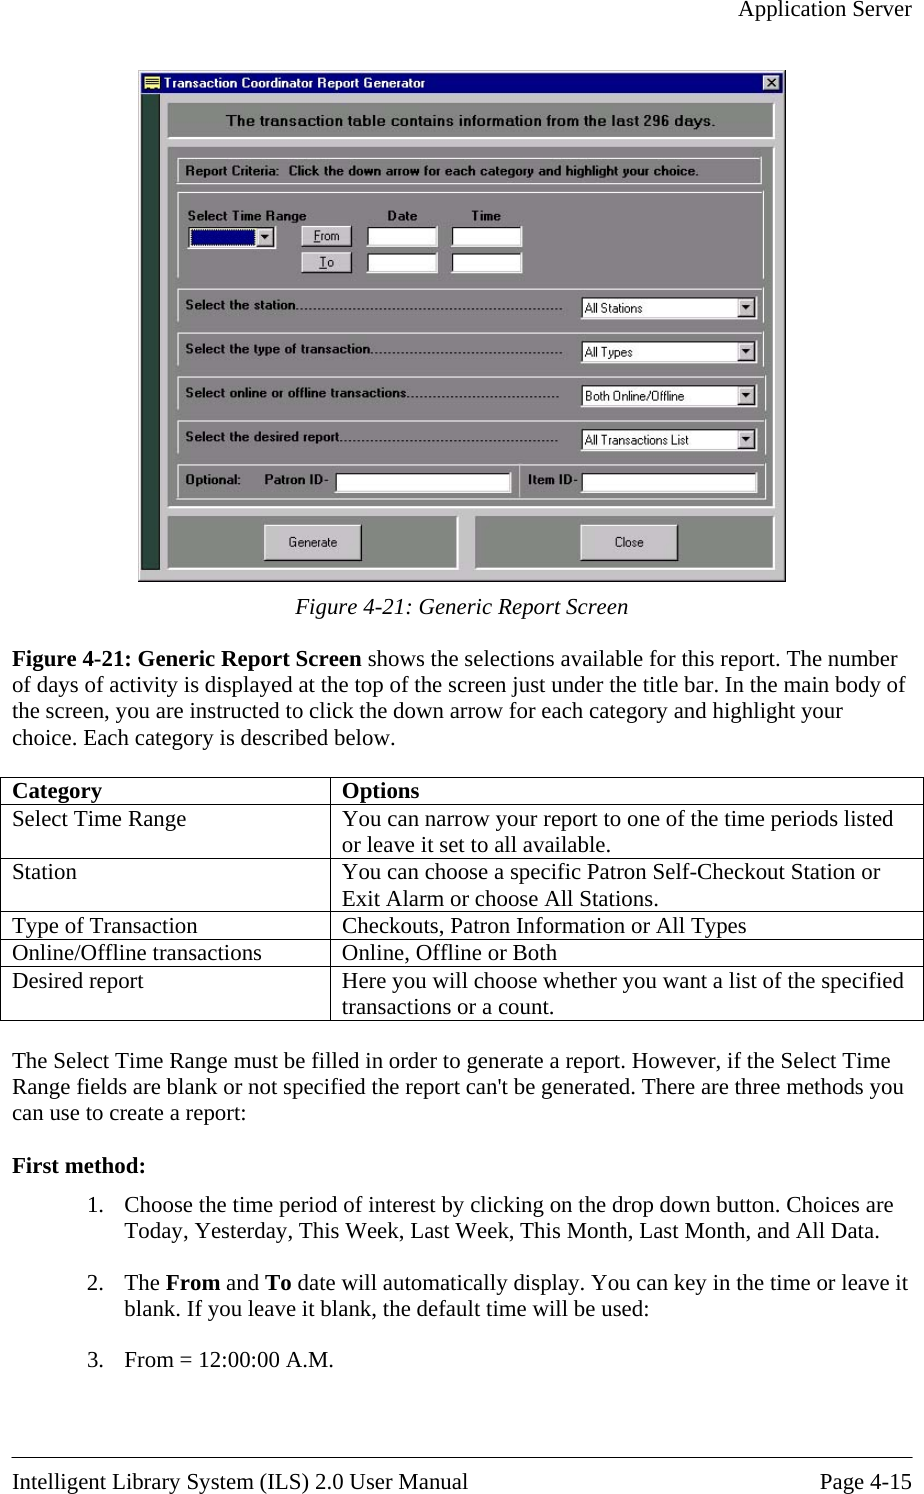   Application Server   Fi creenigure 4-21: Generic Report Sc s the selections available for this report. The number f days of activity is displayed at the top of the screen just under the title bar. In the main body of each category and highlight your gure 4-21: Generic Report Sreen show Fothe screen, you are instructed to click the down arrow for choice. Each category is described below.  Category Options Select Time Range  You can narrow your report to one of the time periods listeor leave it set to all available.  d Station  You can choose a specific Patron Self-Checkout Station or Exit Alarm or choose All Stations. Type of Transaction  Checkouts, Patron Information or All Types Online/Offline transactions  Online, Offline or Both Desired report  Here you will choose whether you want a list of the specified transactions or a count.  The Select Time Range must be filled in order to generate a report. However, if the Select Time Range fields are blank or not specified the report can&apos;t be generated. There are three methods y  can use to create a report:   First method: 1.  Choose the time period of interest by icking on the drop down button. Choices are Today, Yesterday ast Month, and All Data. ou cl, This Week, Last Week, This Month, L2. The From and To date will automatically display. You can key in the time or leave it blank. If you leave it blank, the default time will be used:      3.  From = 12:00:00 A.M.  Intelligent Library System (ILS) 2.0 User Manual  Page 4-15 